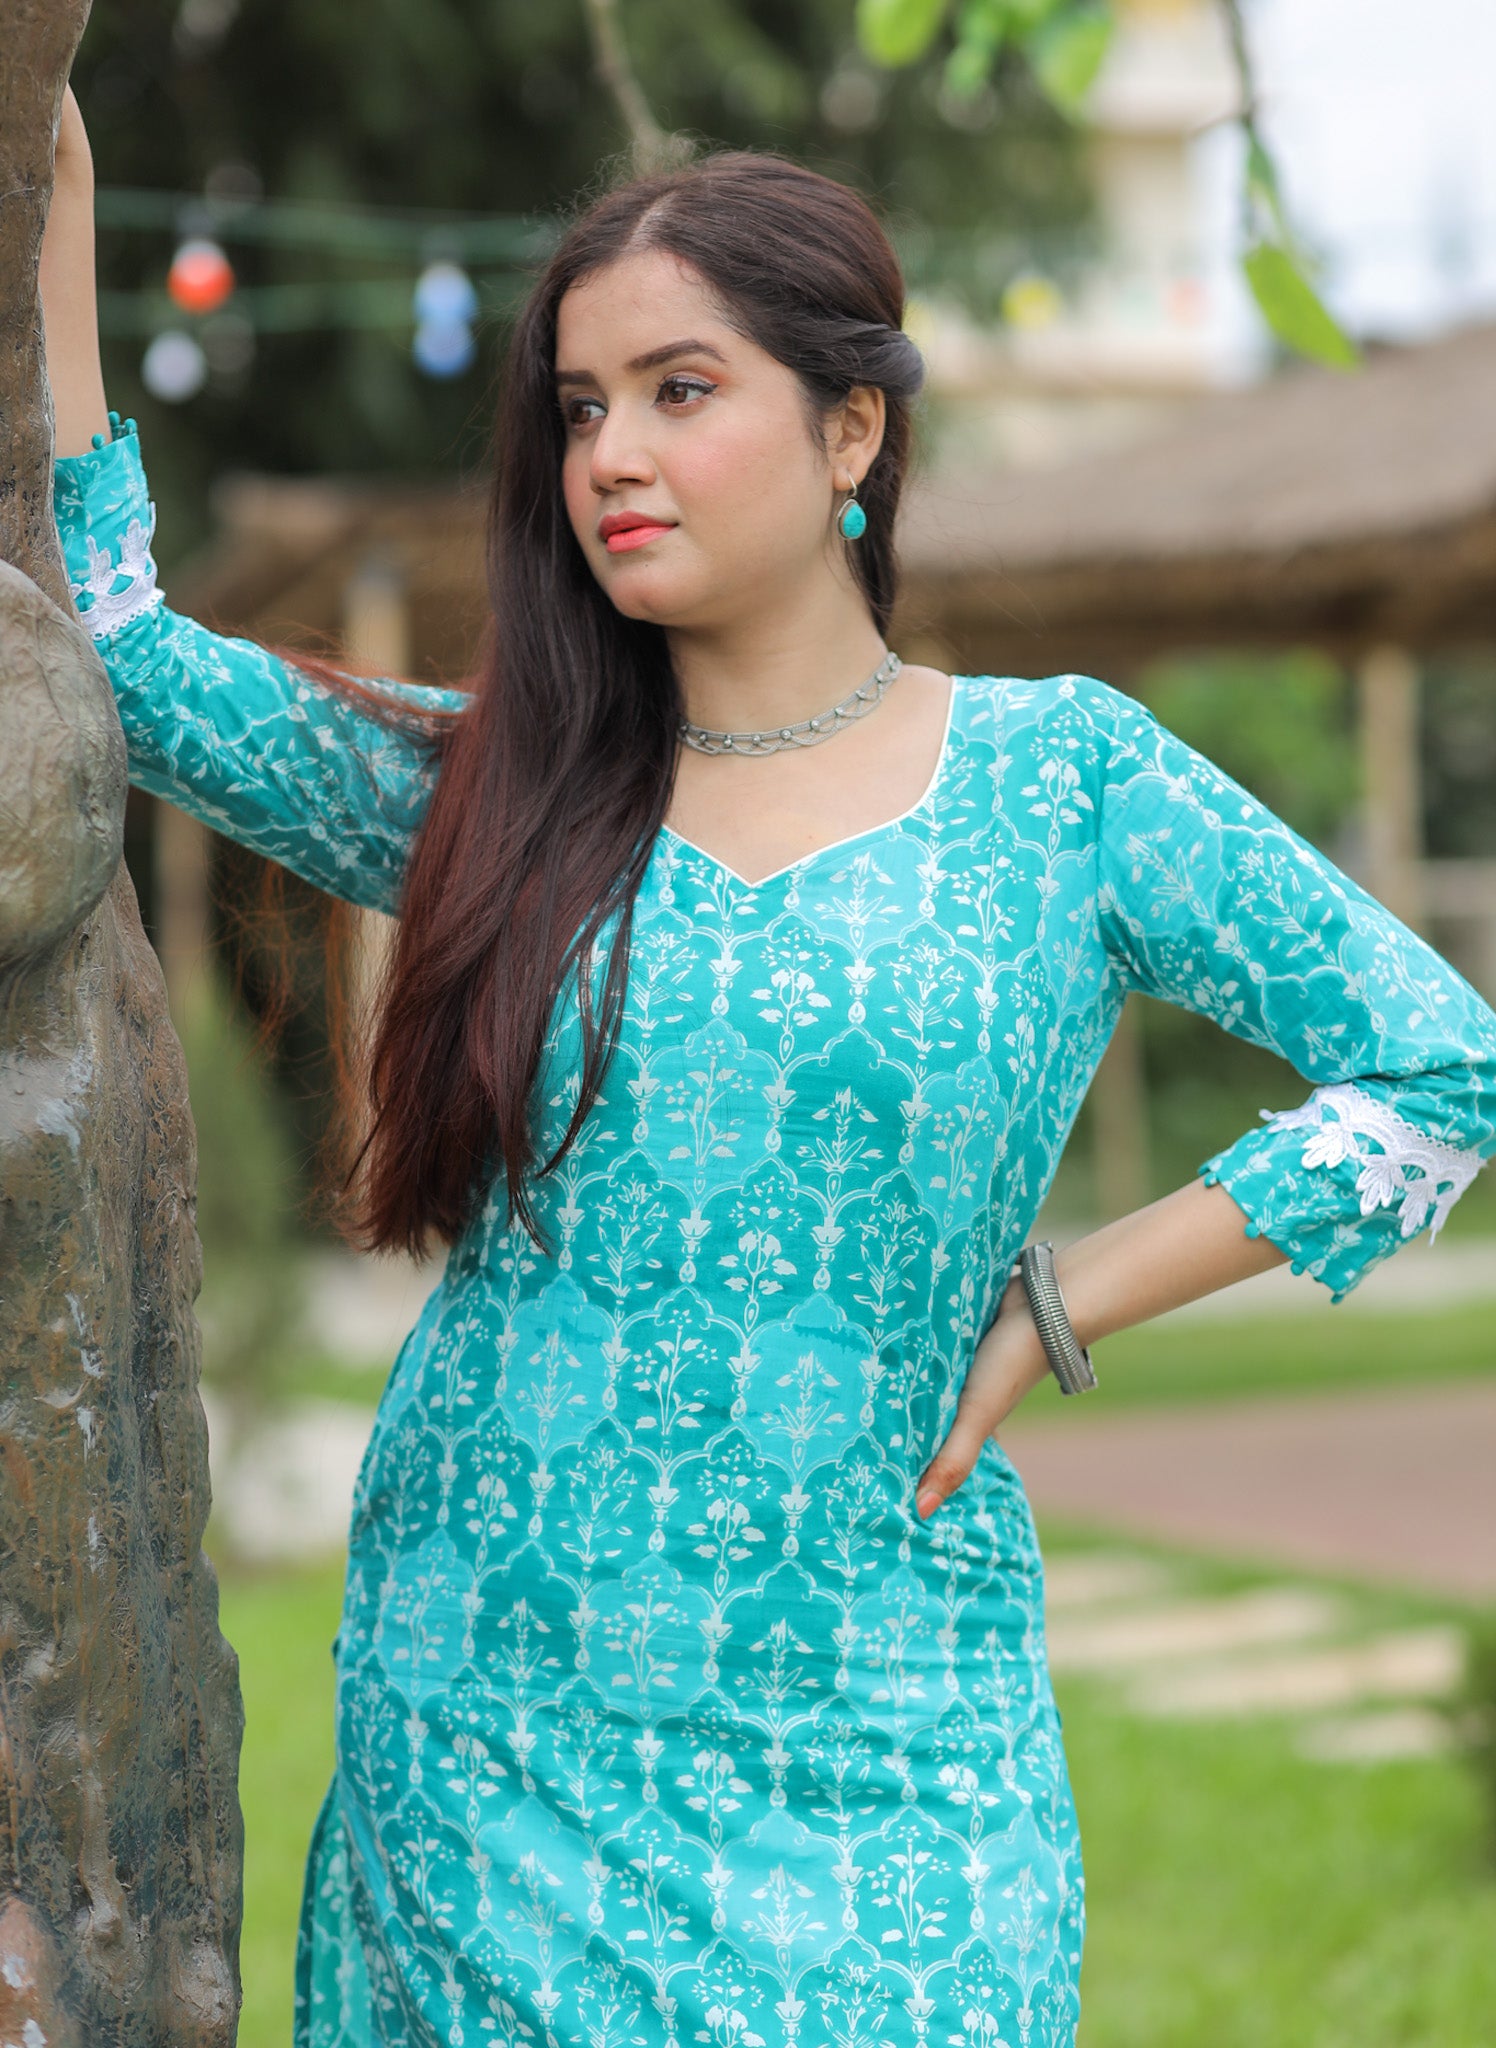 Turquoise green printed kurta with lace details and pocket.